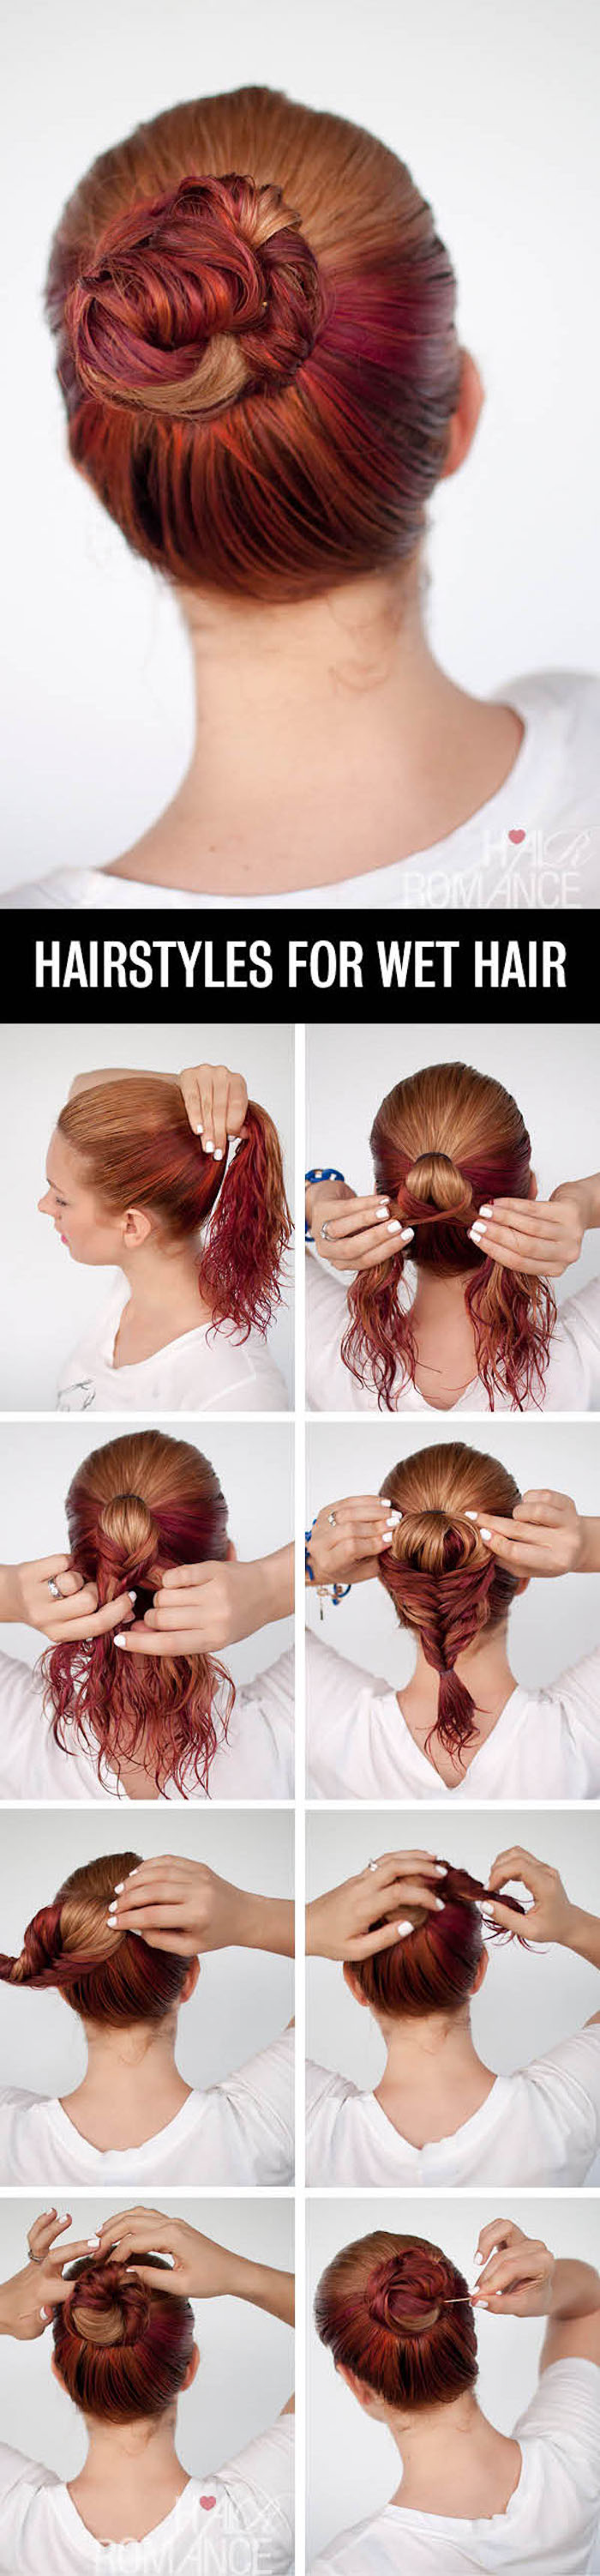 hairstyles for wet hair, shoulder length hair, step by step, diy tutorial, photo collage